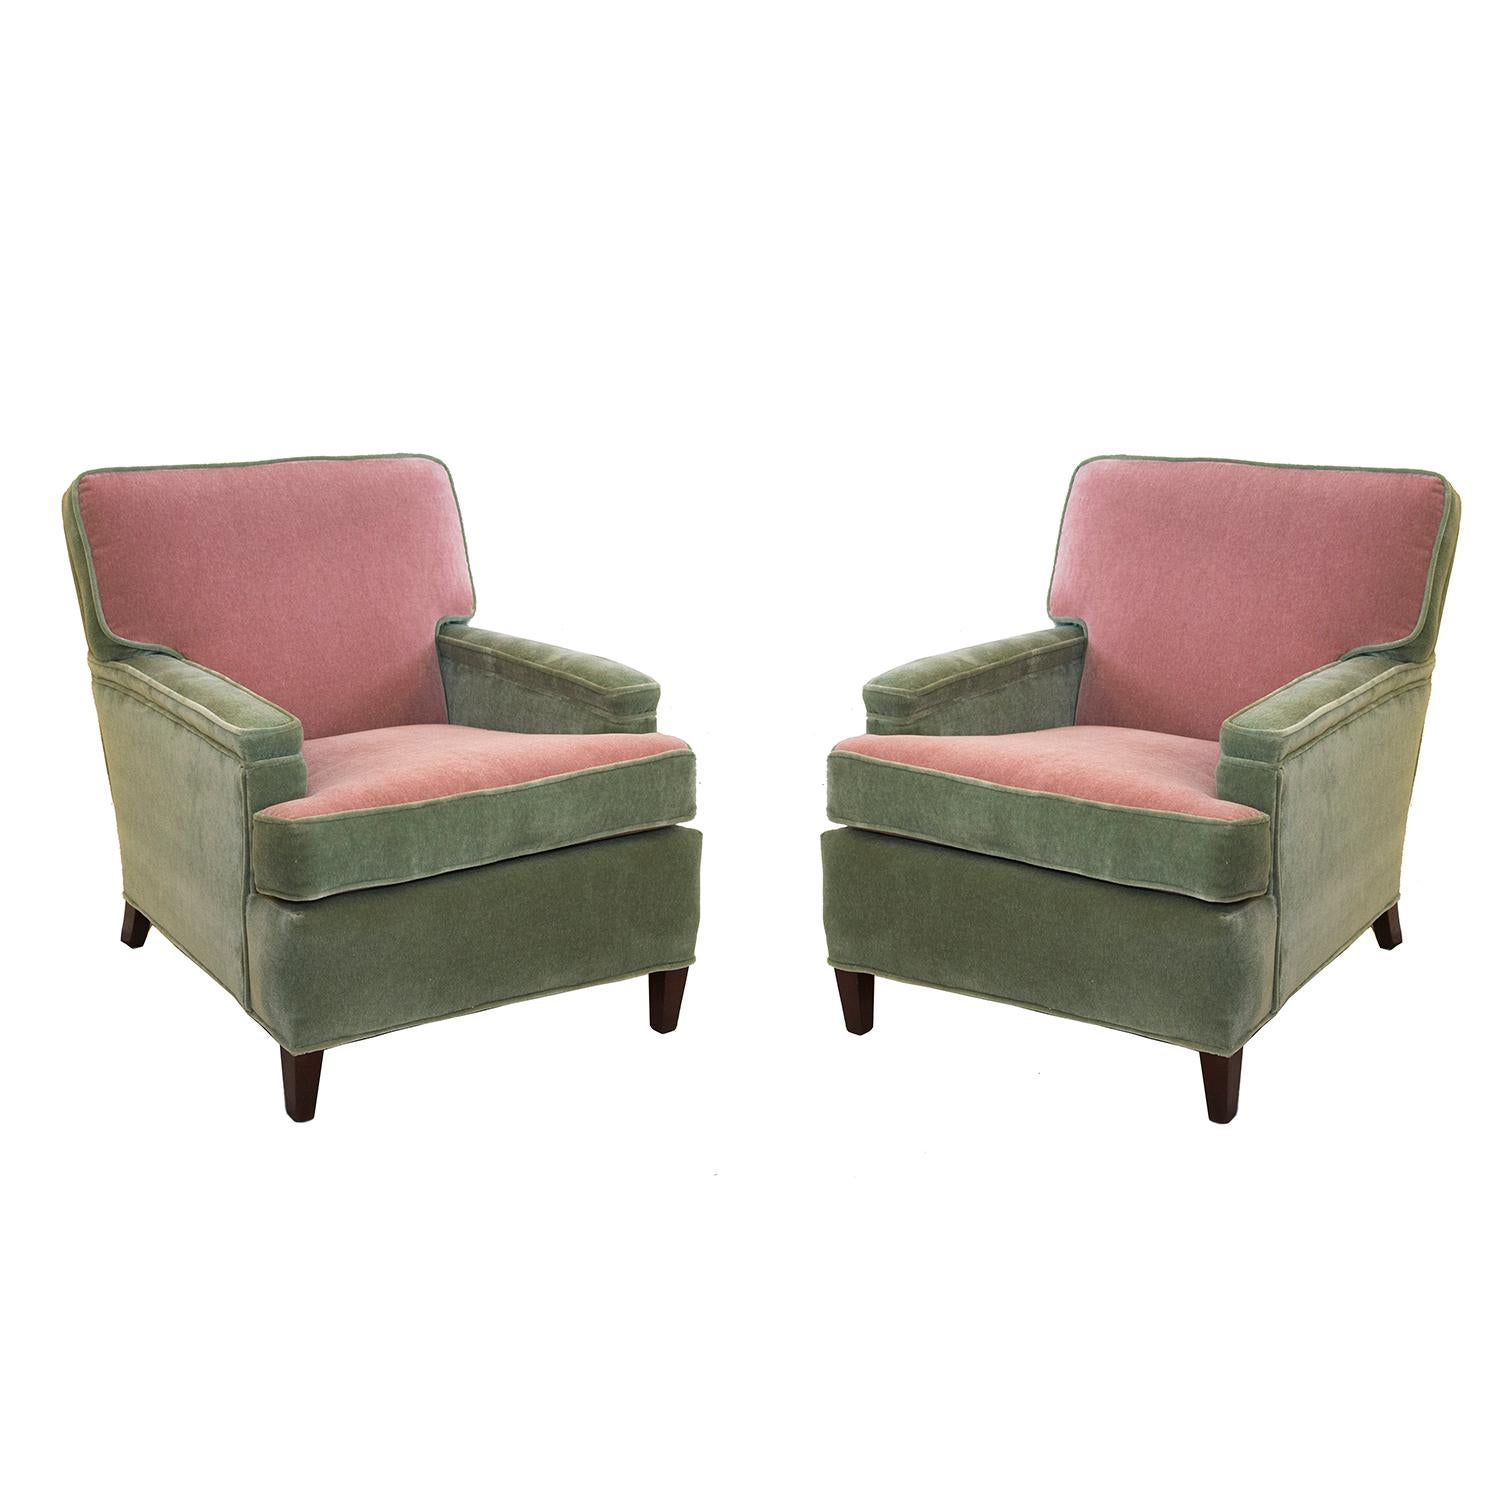 pink and green chairs